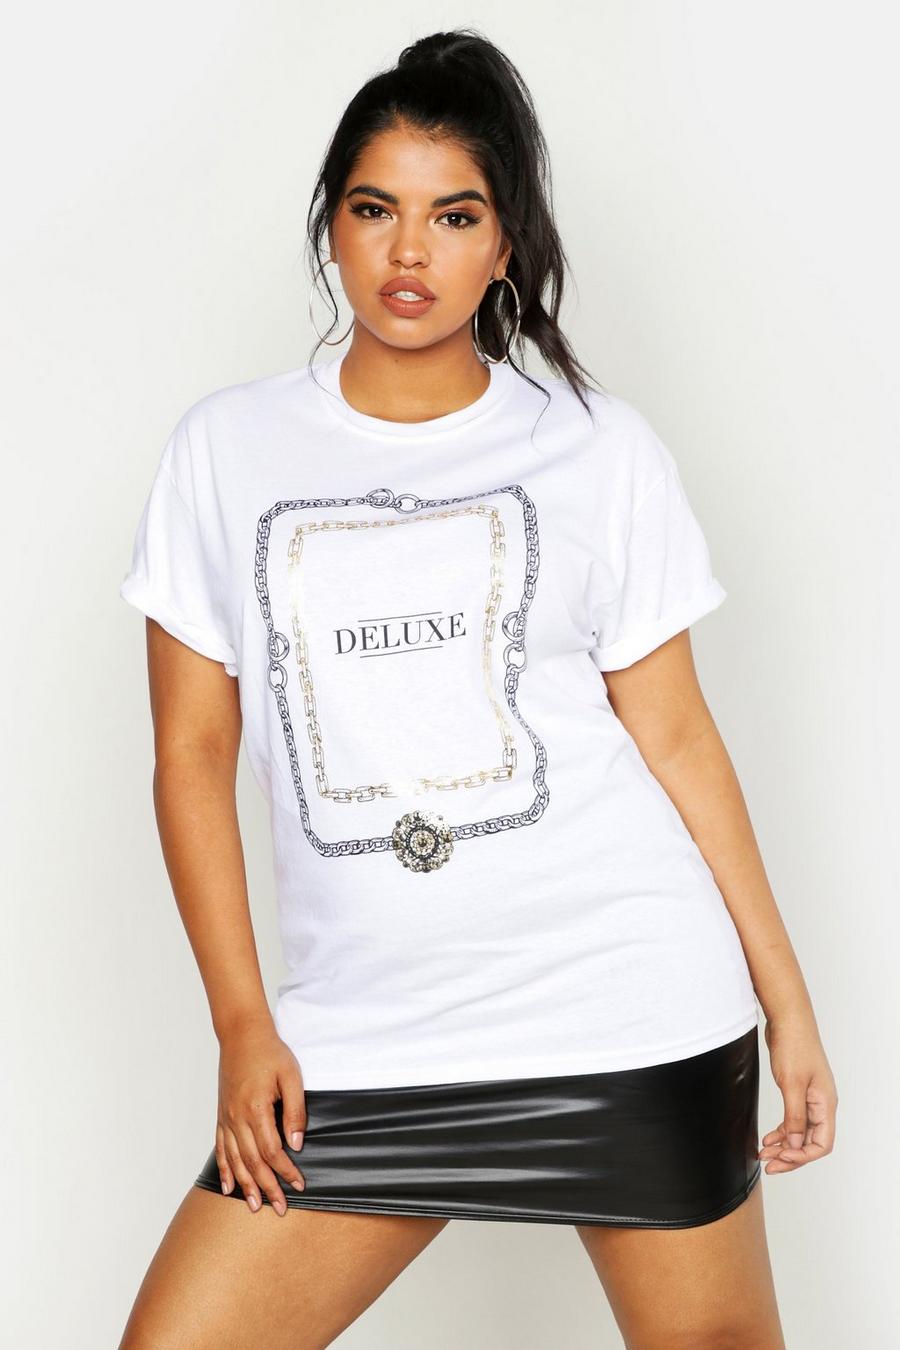 Plus Foil Print Chain Deluxe Graphic T-Shirt image number 1